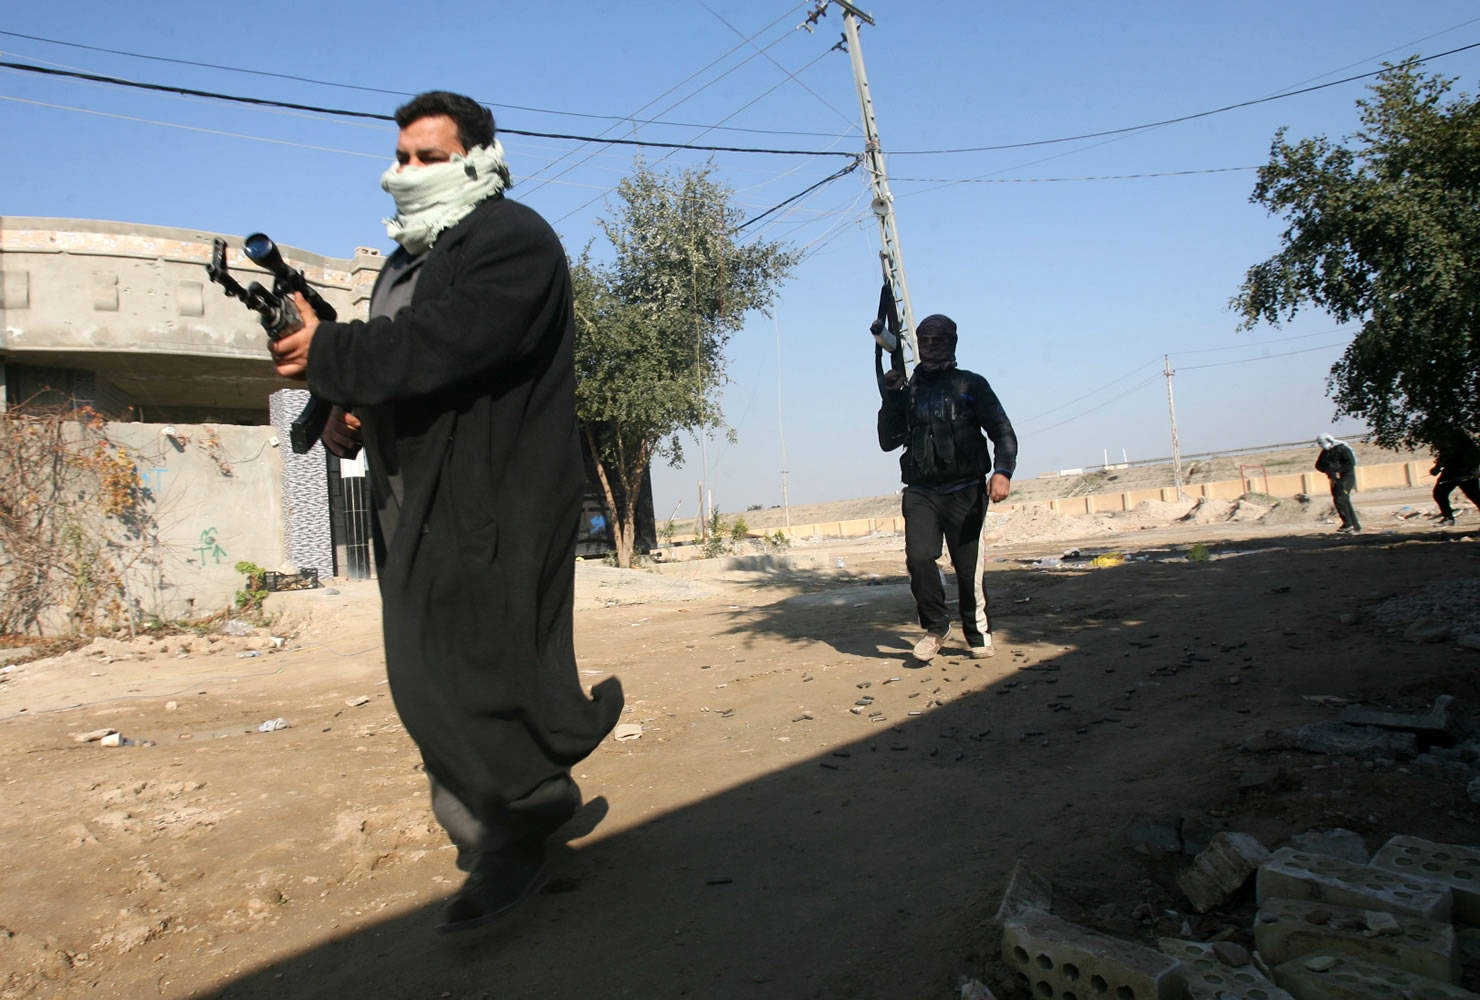 Gunmen patrol during clashes with Iraqi security forces Thursday in Fallujah, 40 miles west of Baghdad, Iraq.